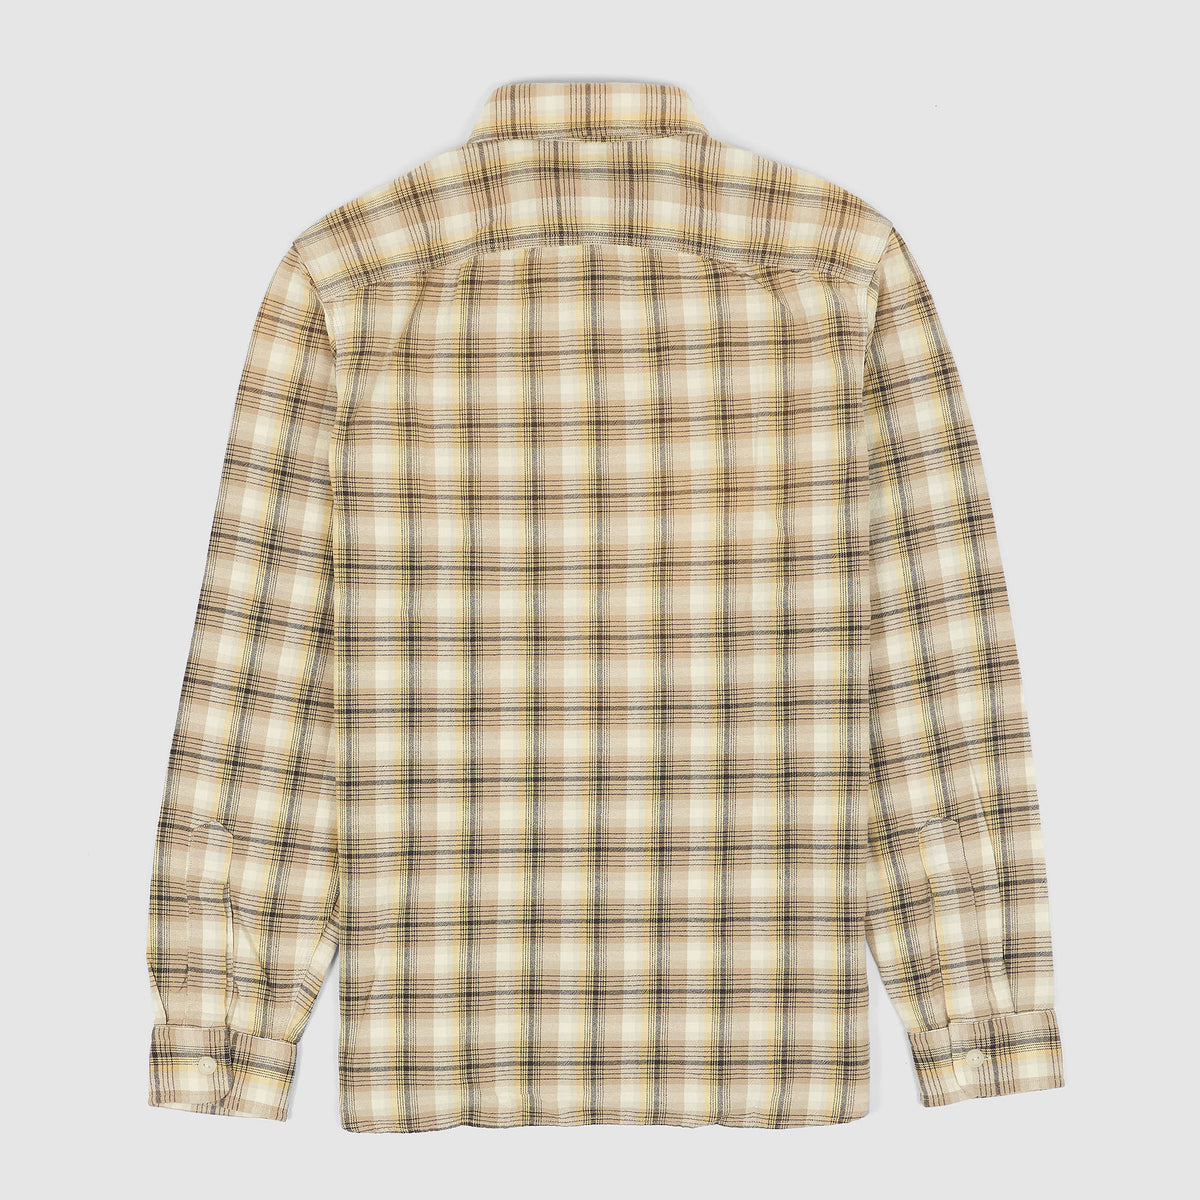 Double RL Checked Workshirt